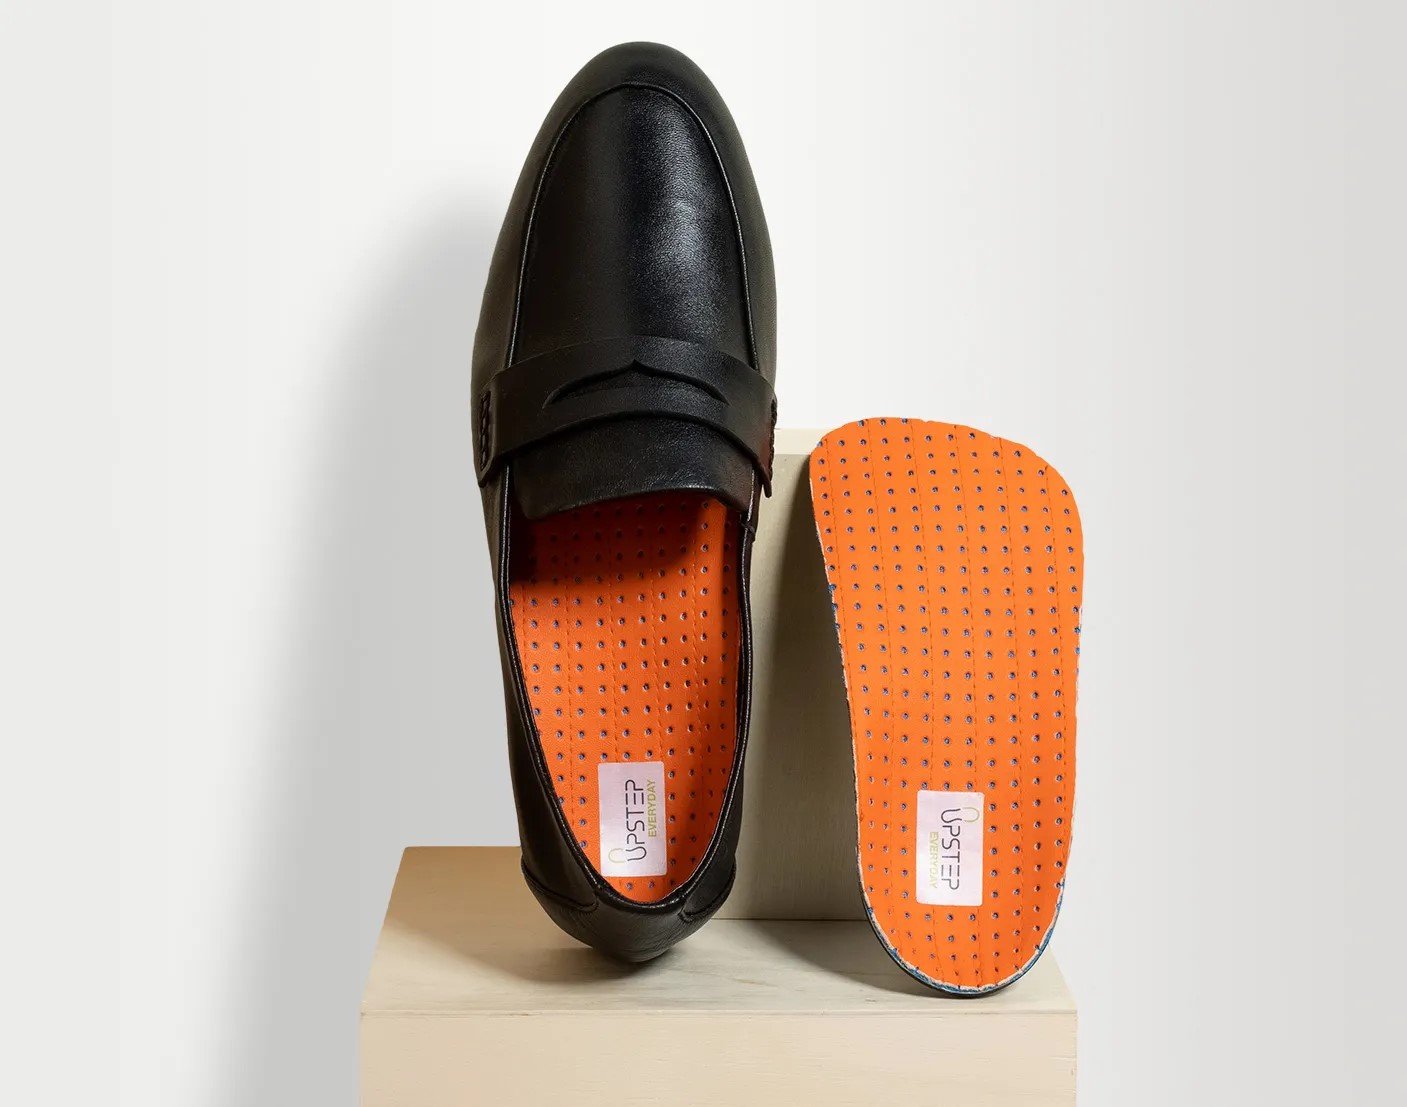 Orange Upstep insoles for heel pain being displayed vertically in and next to a formal shoe